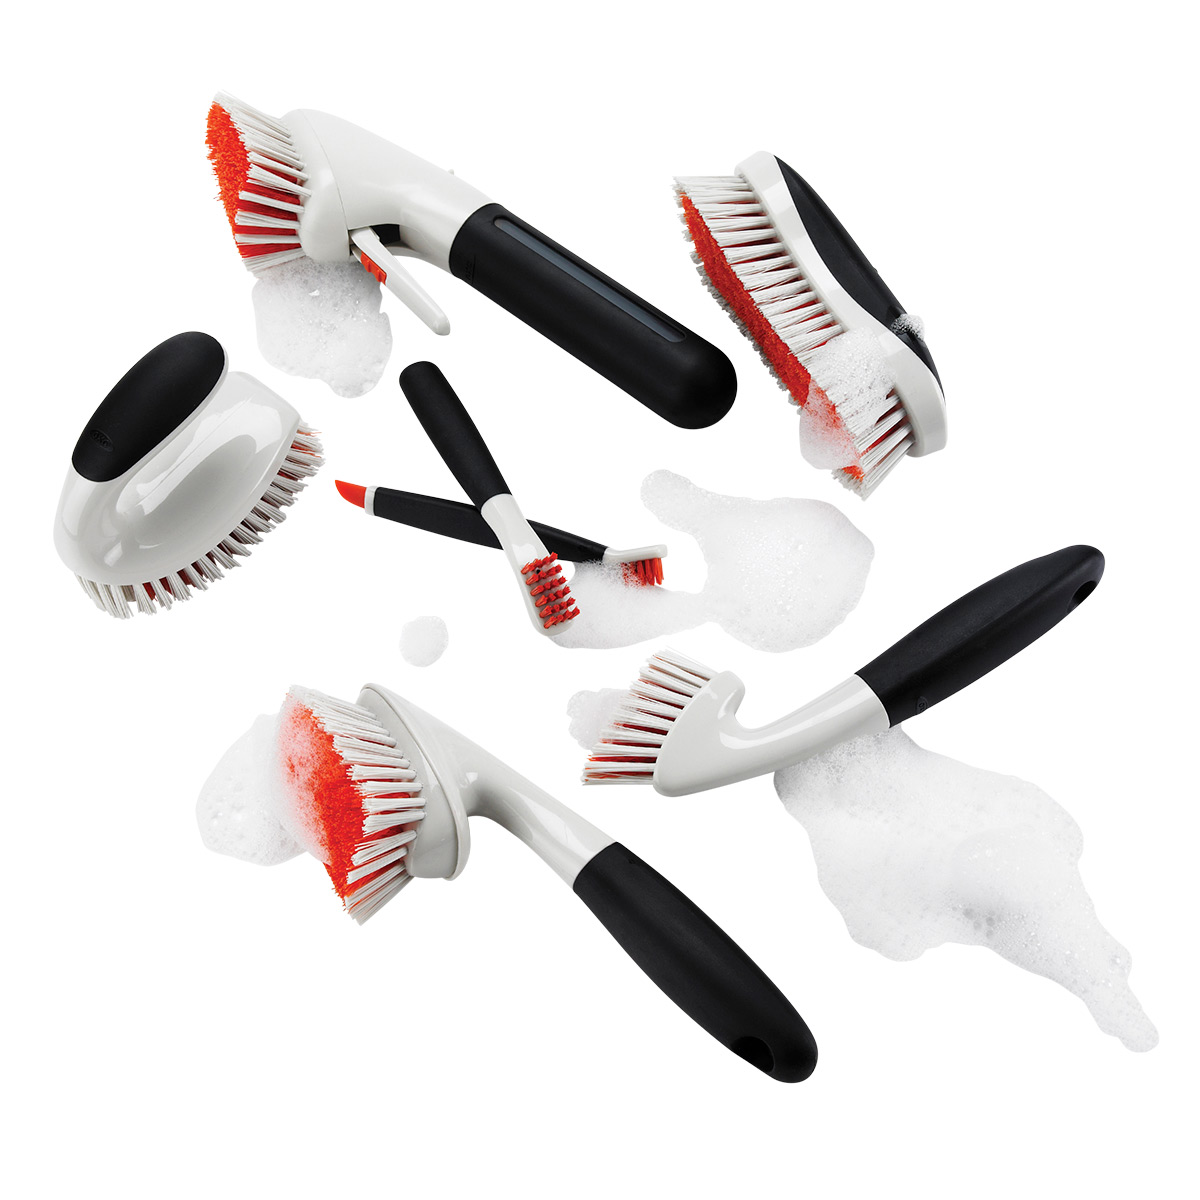 OXO Good Grips Deep Clean Grout Cleaning Brushes